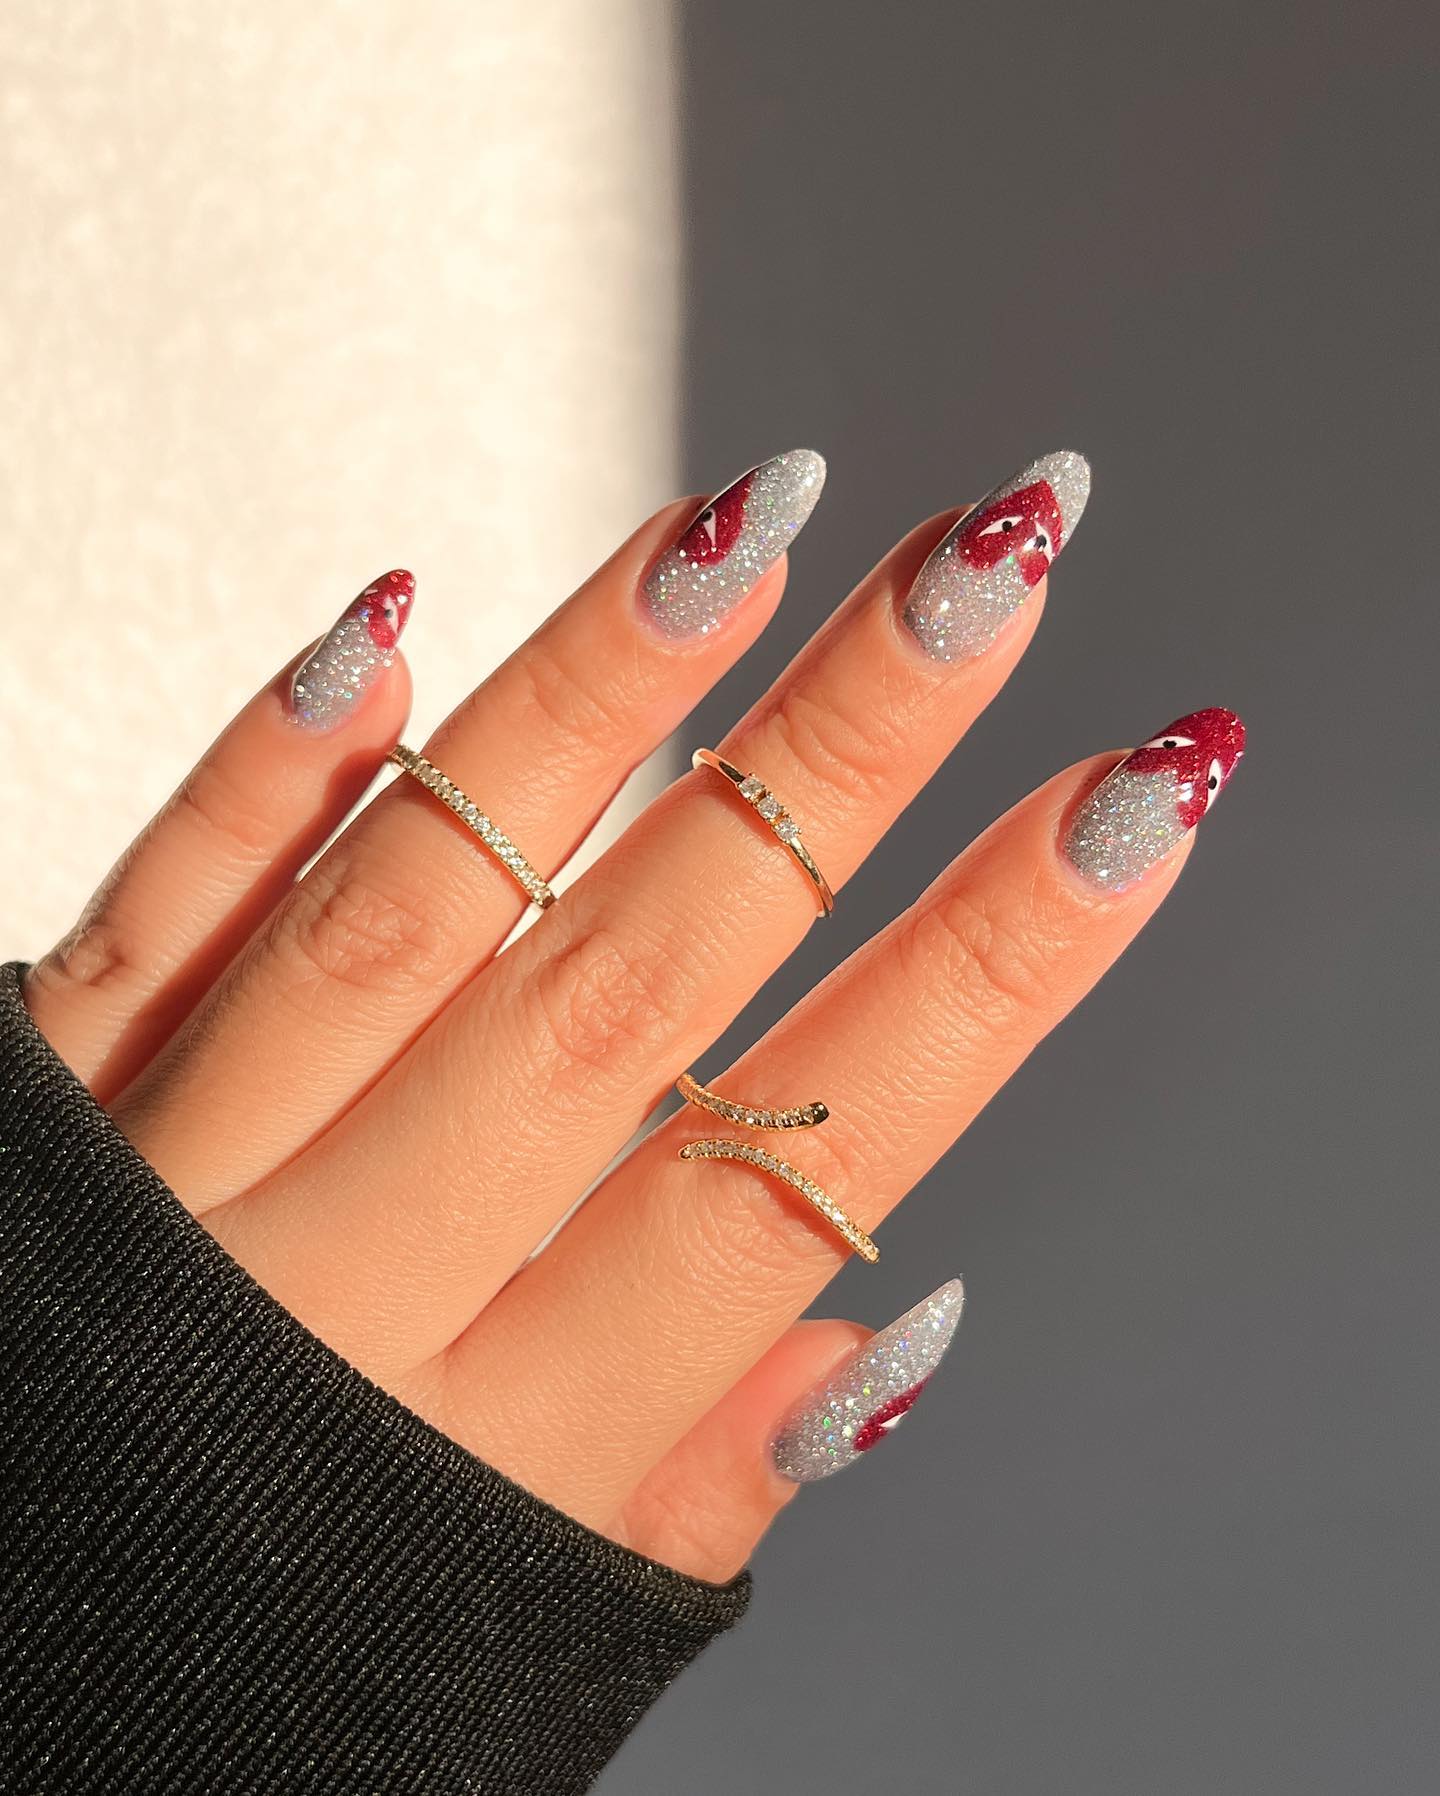 Red And Silver Nails